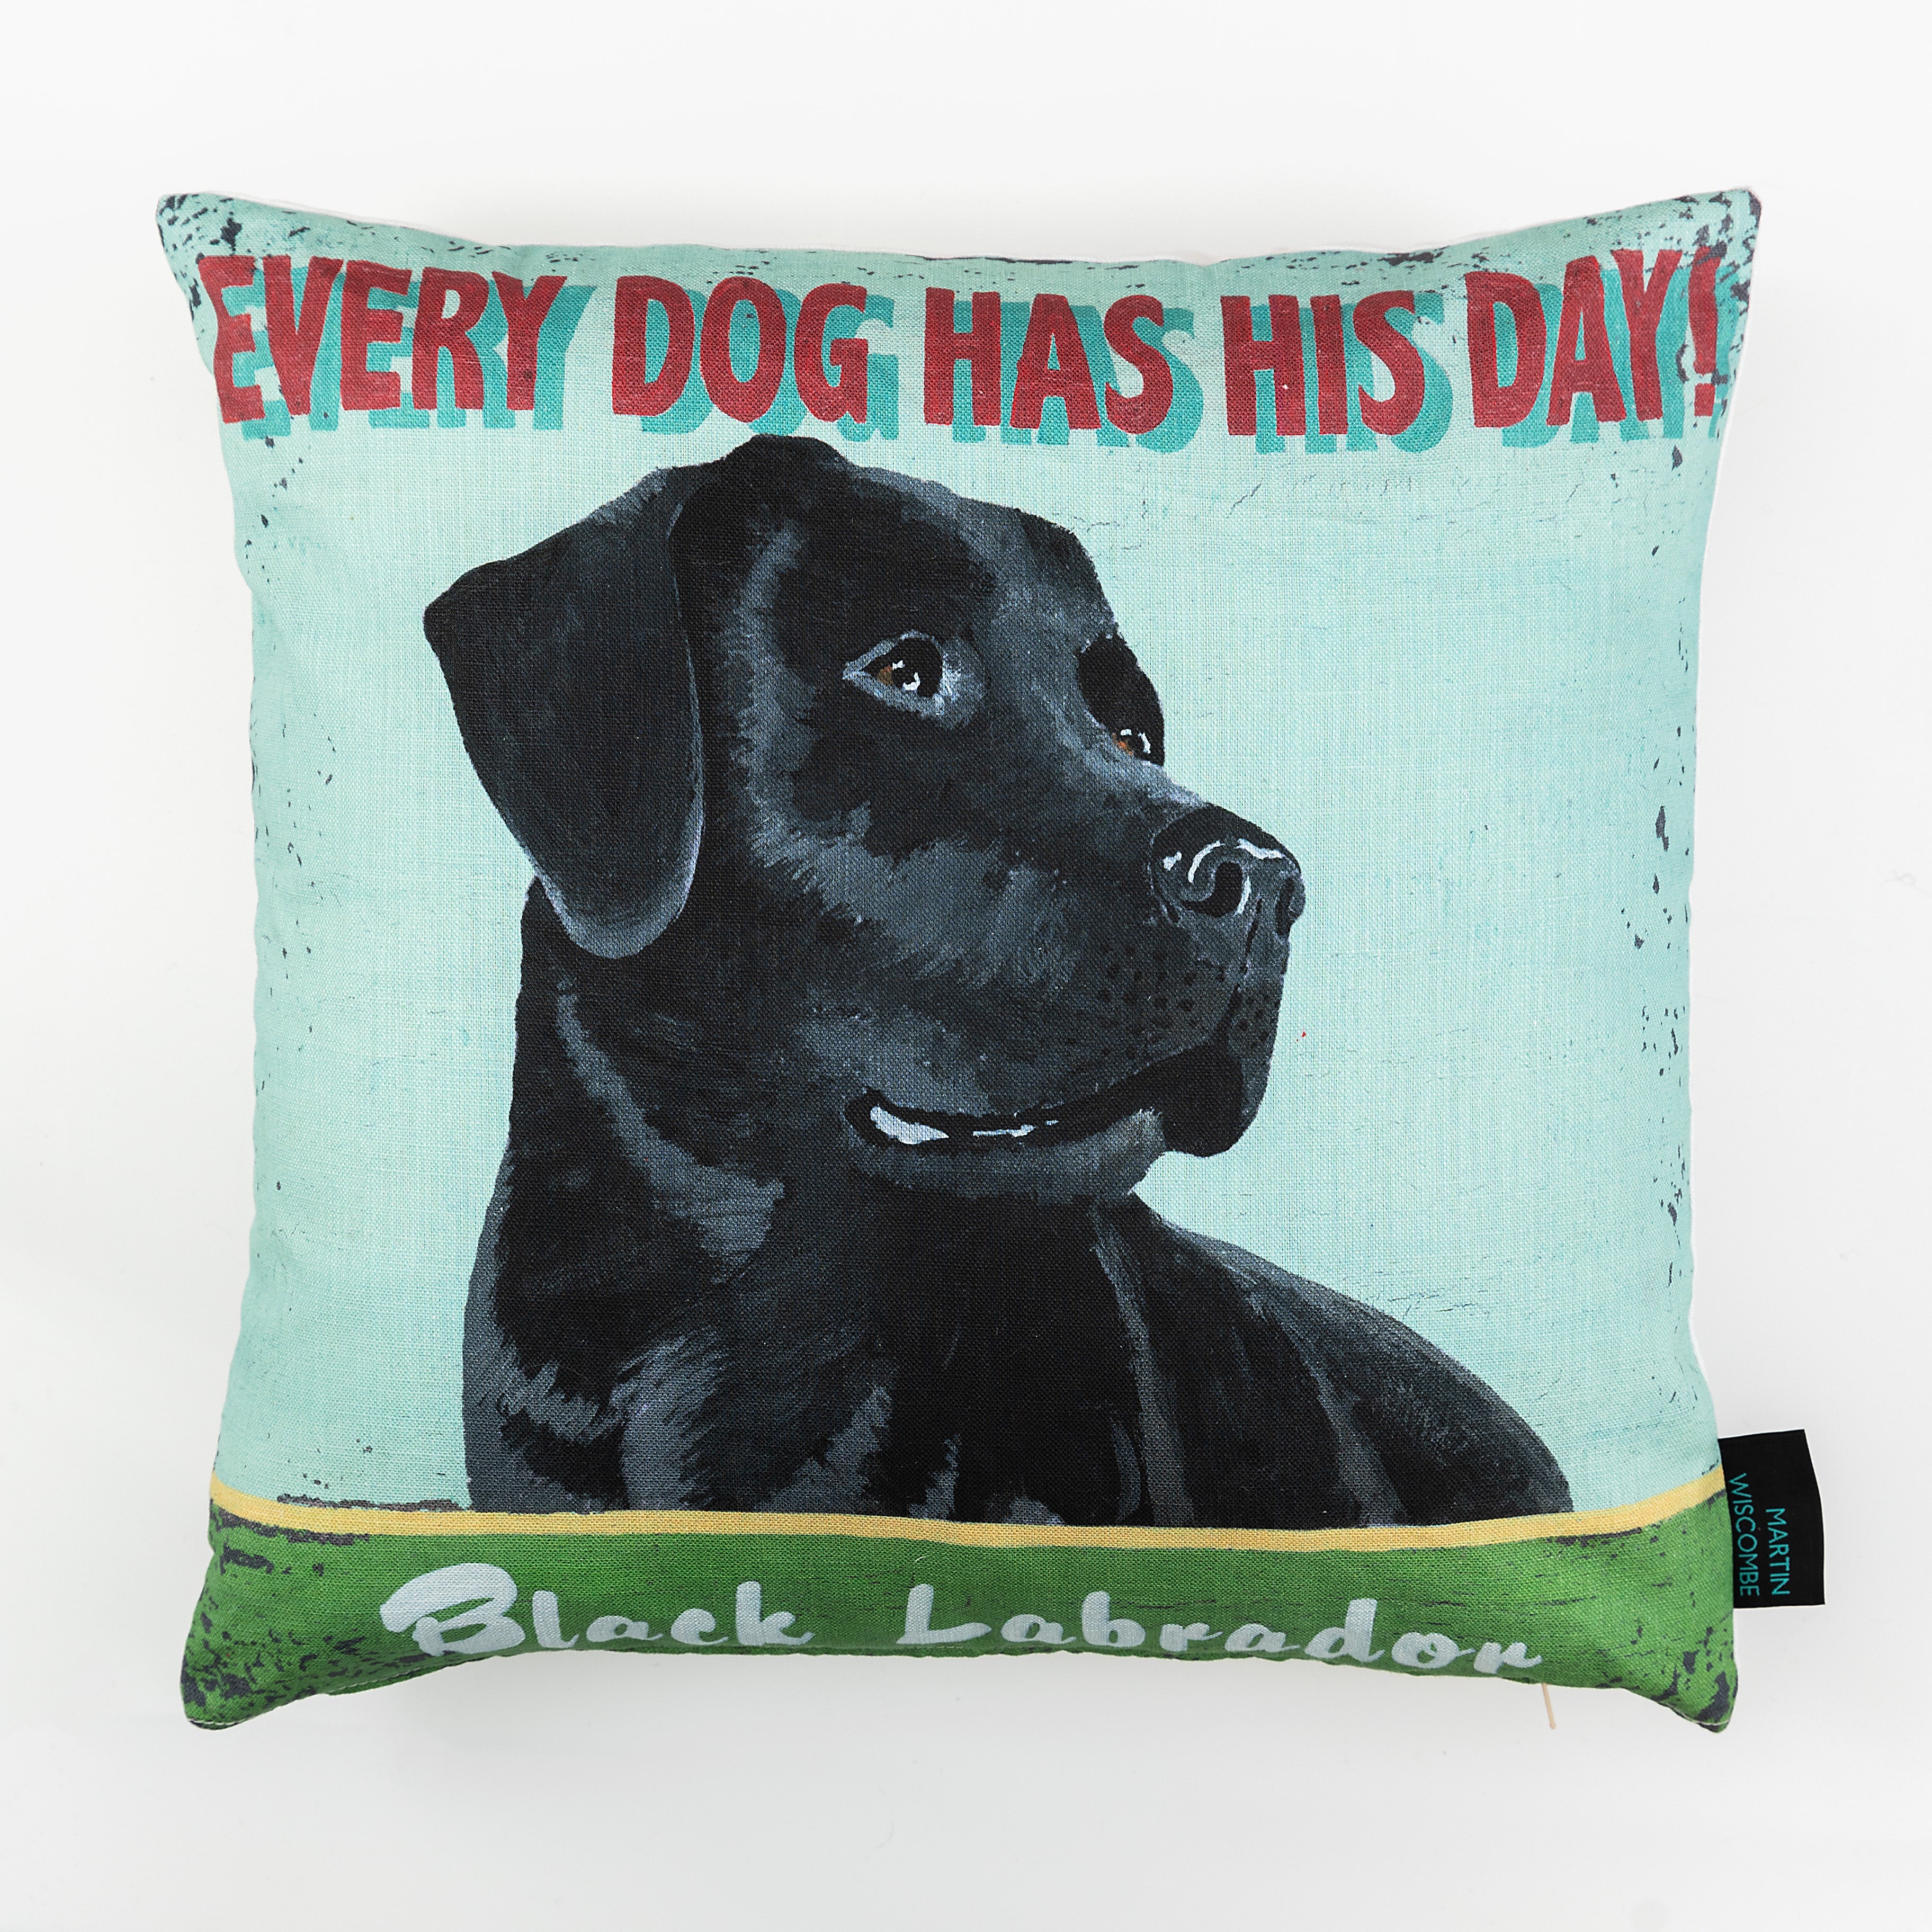 A cushion with illustrated black Labrador head and shoulders, the dog is facing to the right on a pale blue background. The words 'Every Dog Has His Day!' across the top.